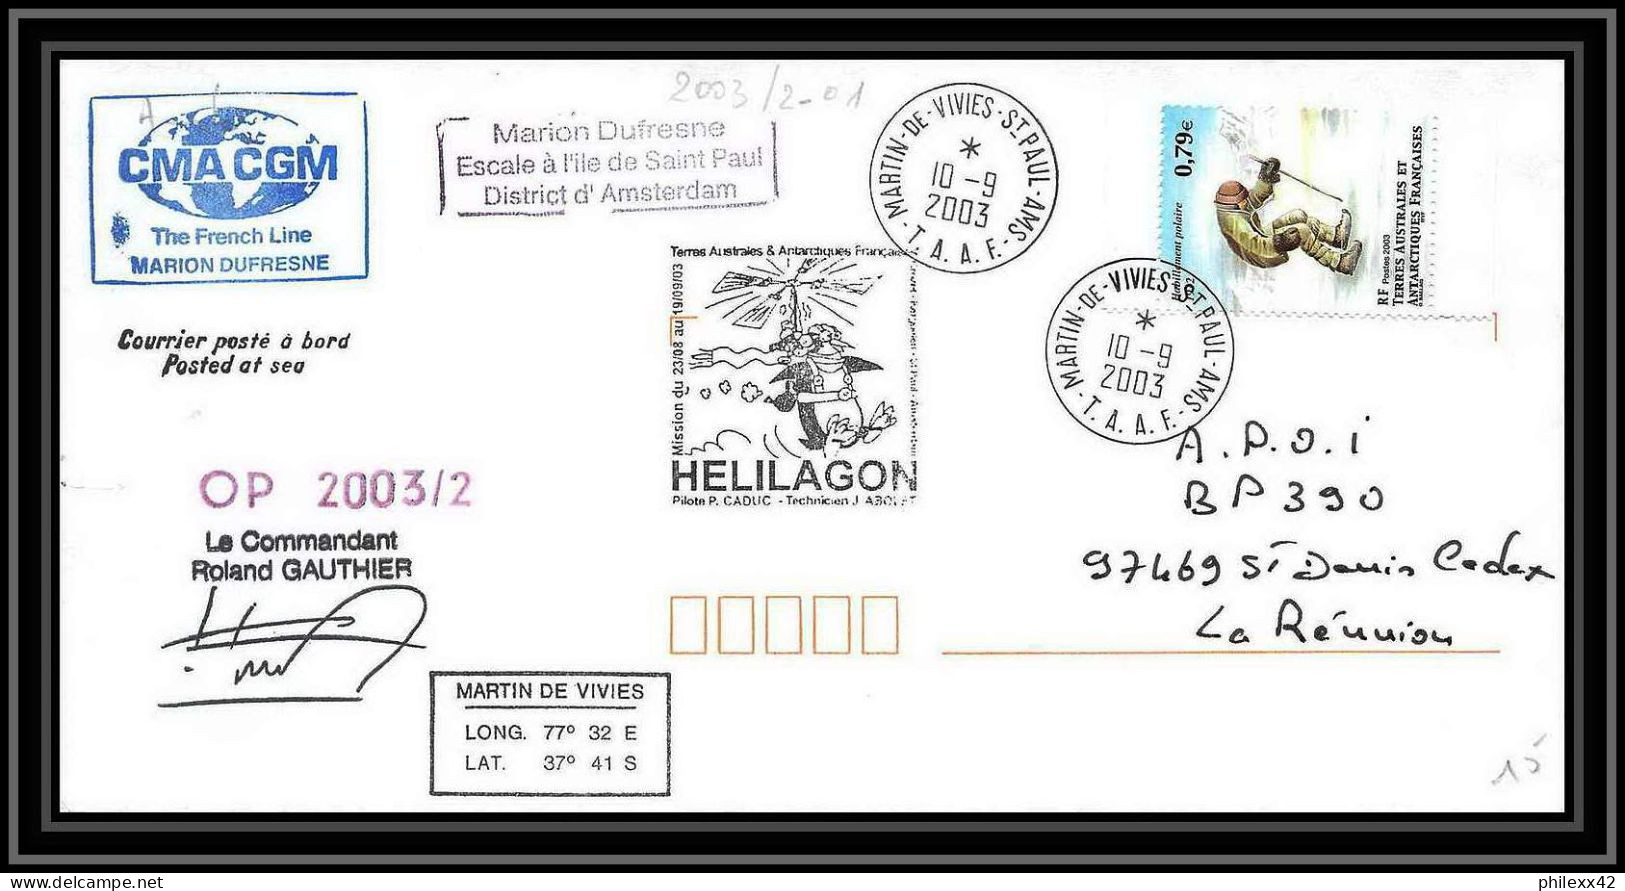 2410 Dufresne 2 Signé Signed Op 2003/2 Crozet 10/9/2003 N°353 ANTARCTIC Terres Australes (taaf) Lettre Cover Helilagon - Helicopters